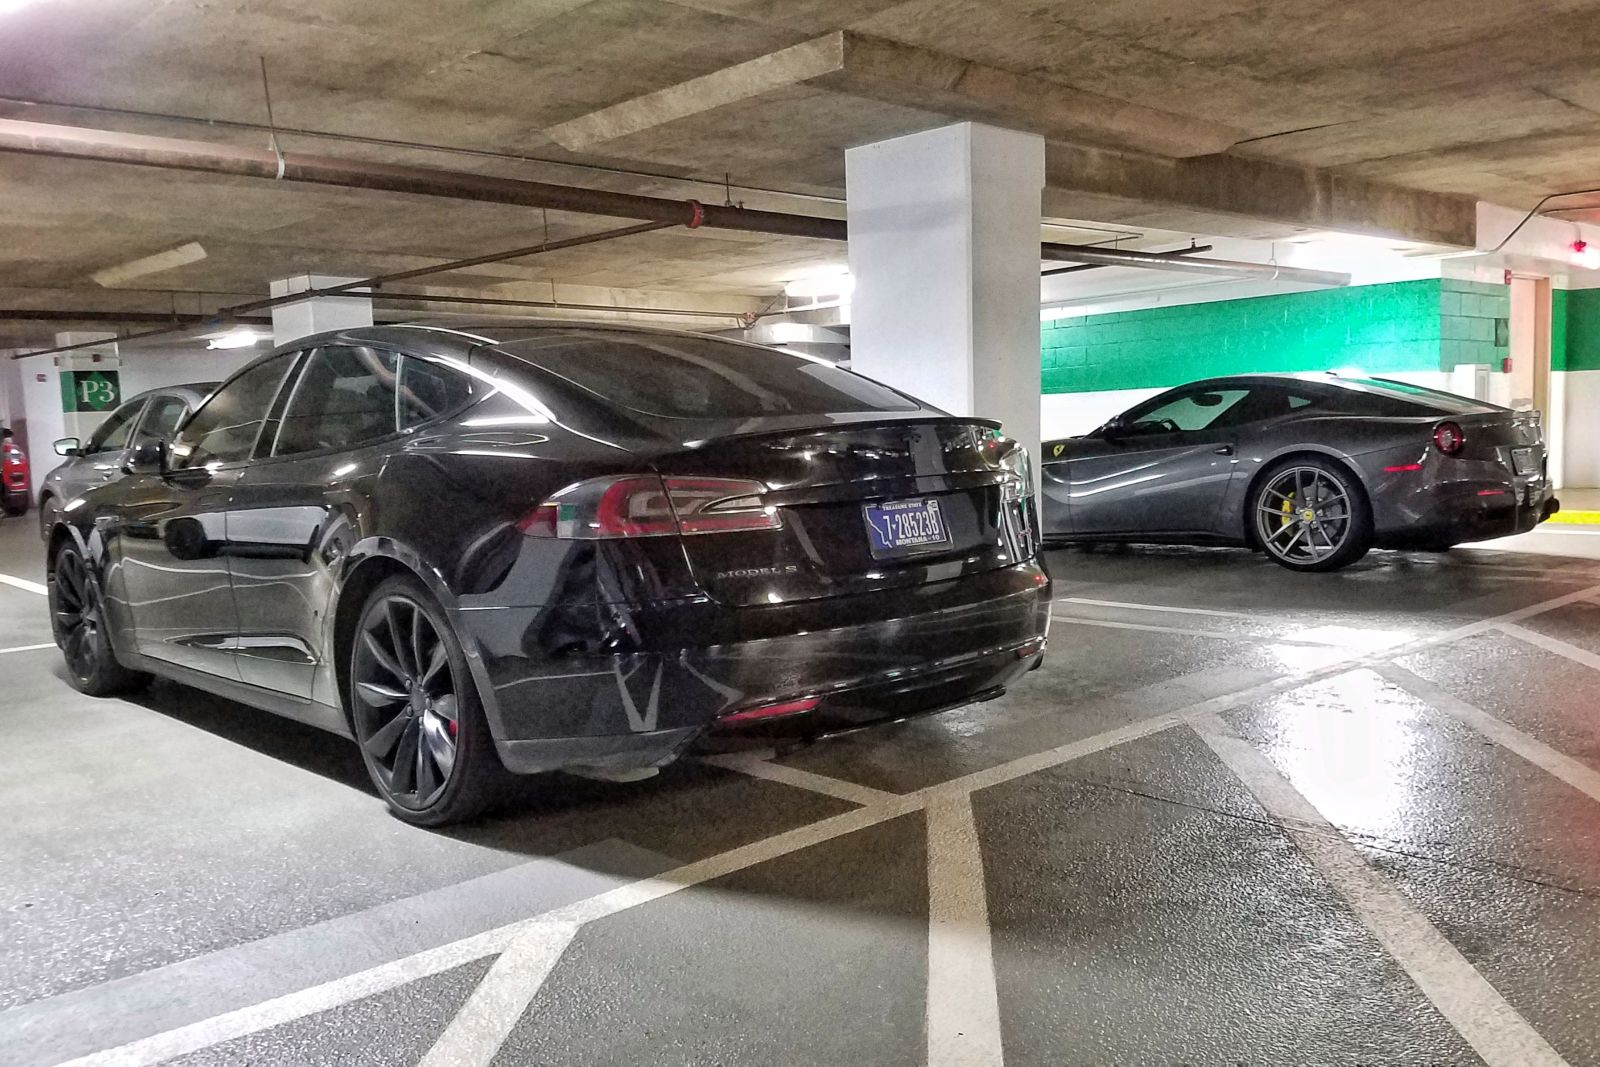 Illustration for article titled You will be thoroughly unsurprised by the latest car with Virginia car tax-dodging Montana plates parked in two reserved spaces in my office parking garage